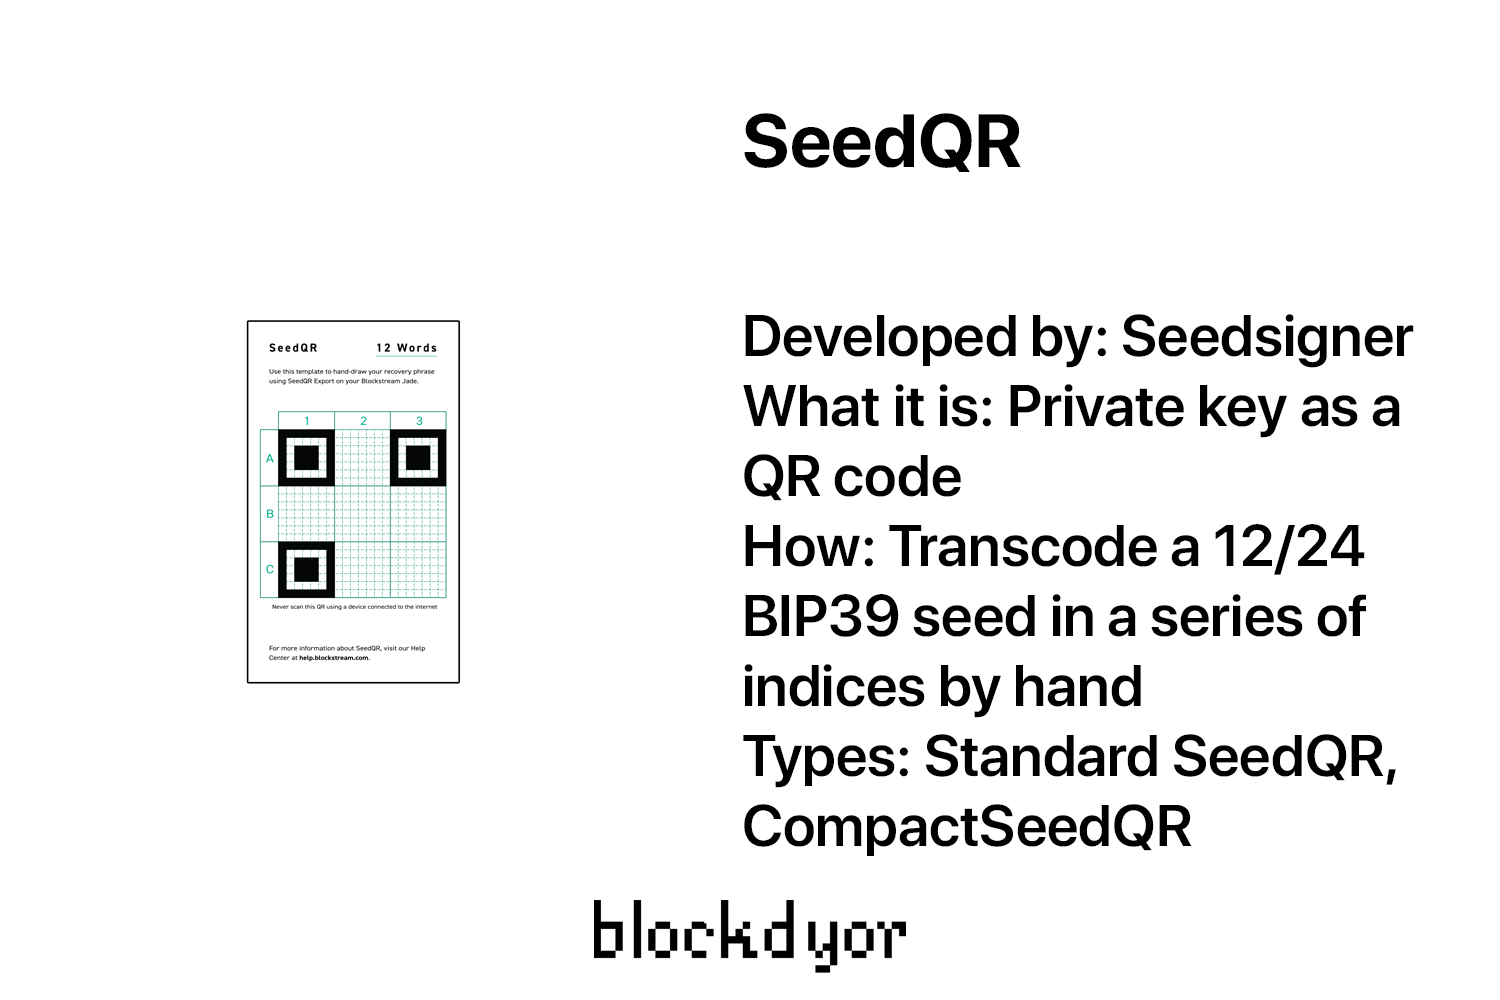 SeedQR Overview